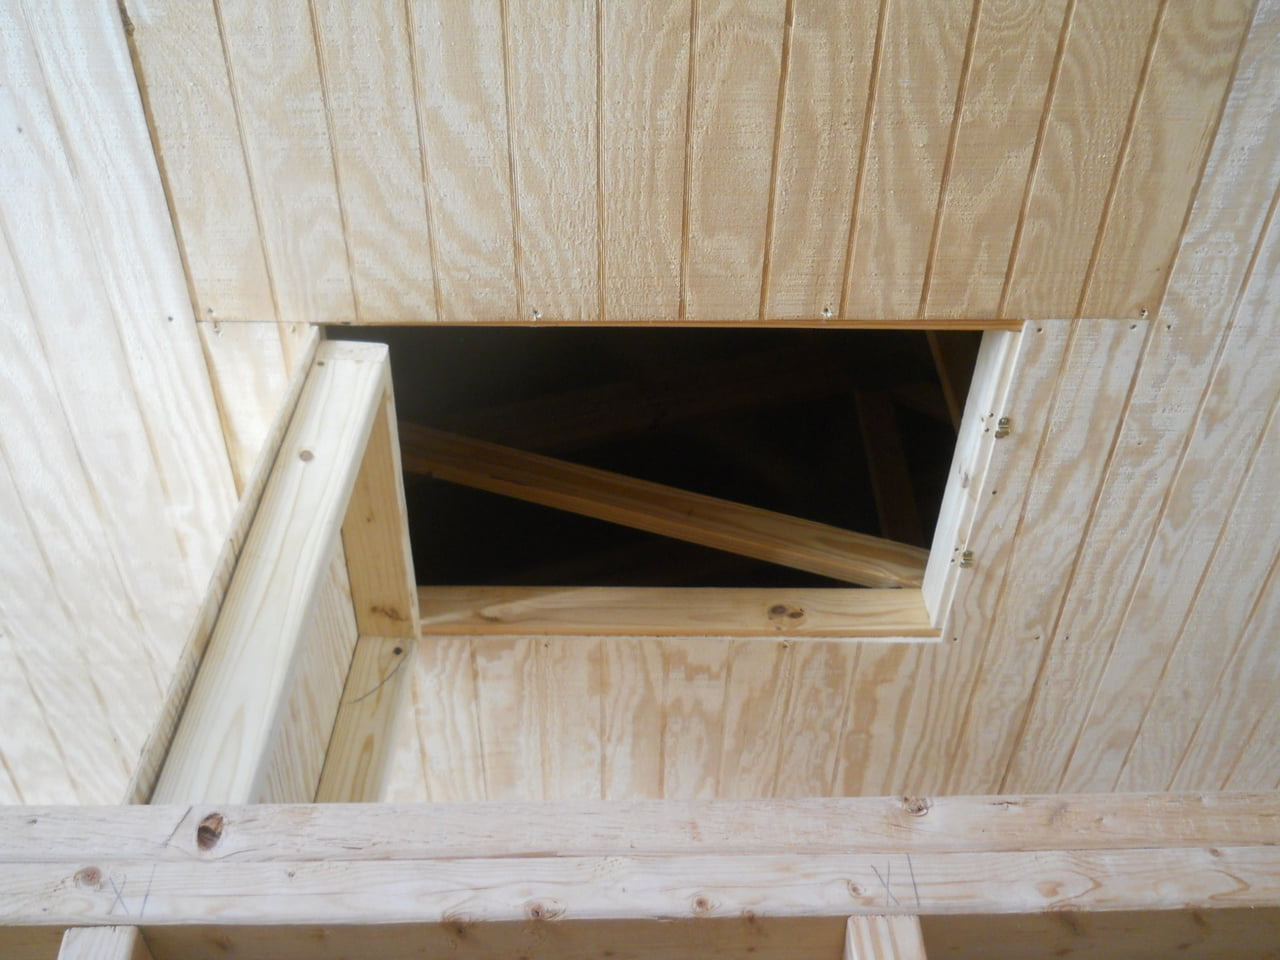 How To Open The Attic